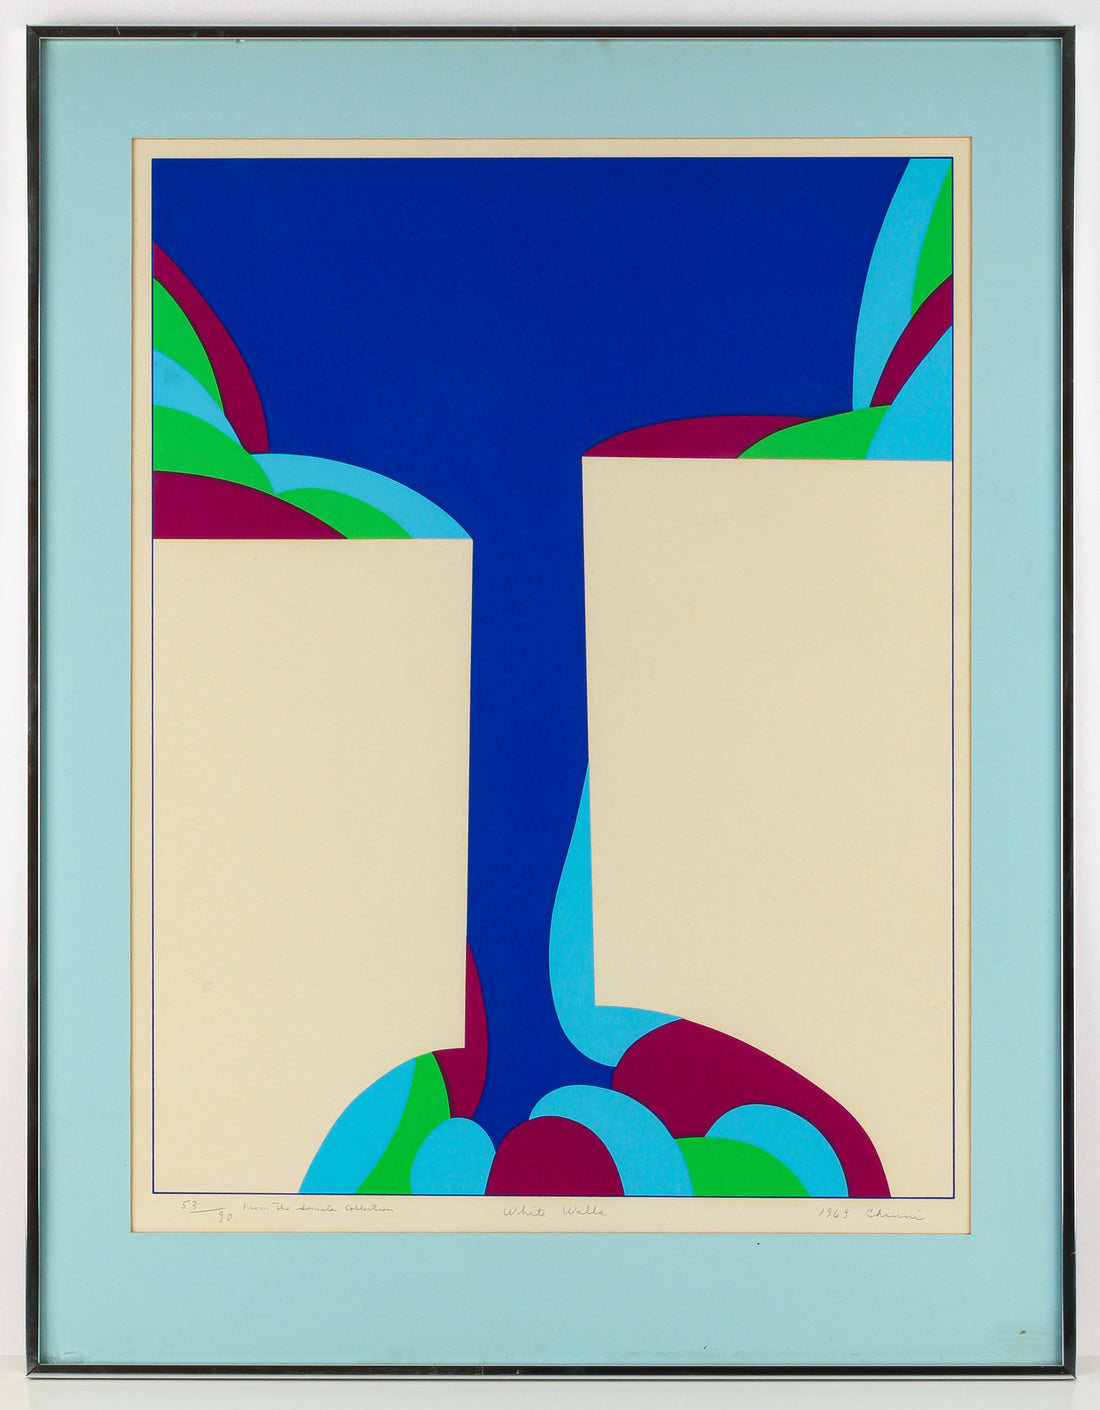 Peter Chinni - "White Walls" - Serigraph Screen Print on Paper